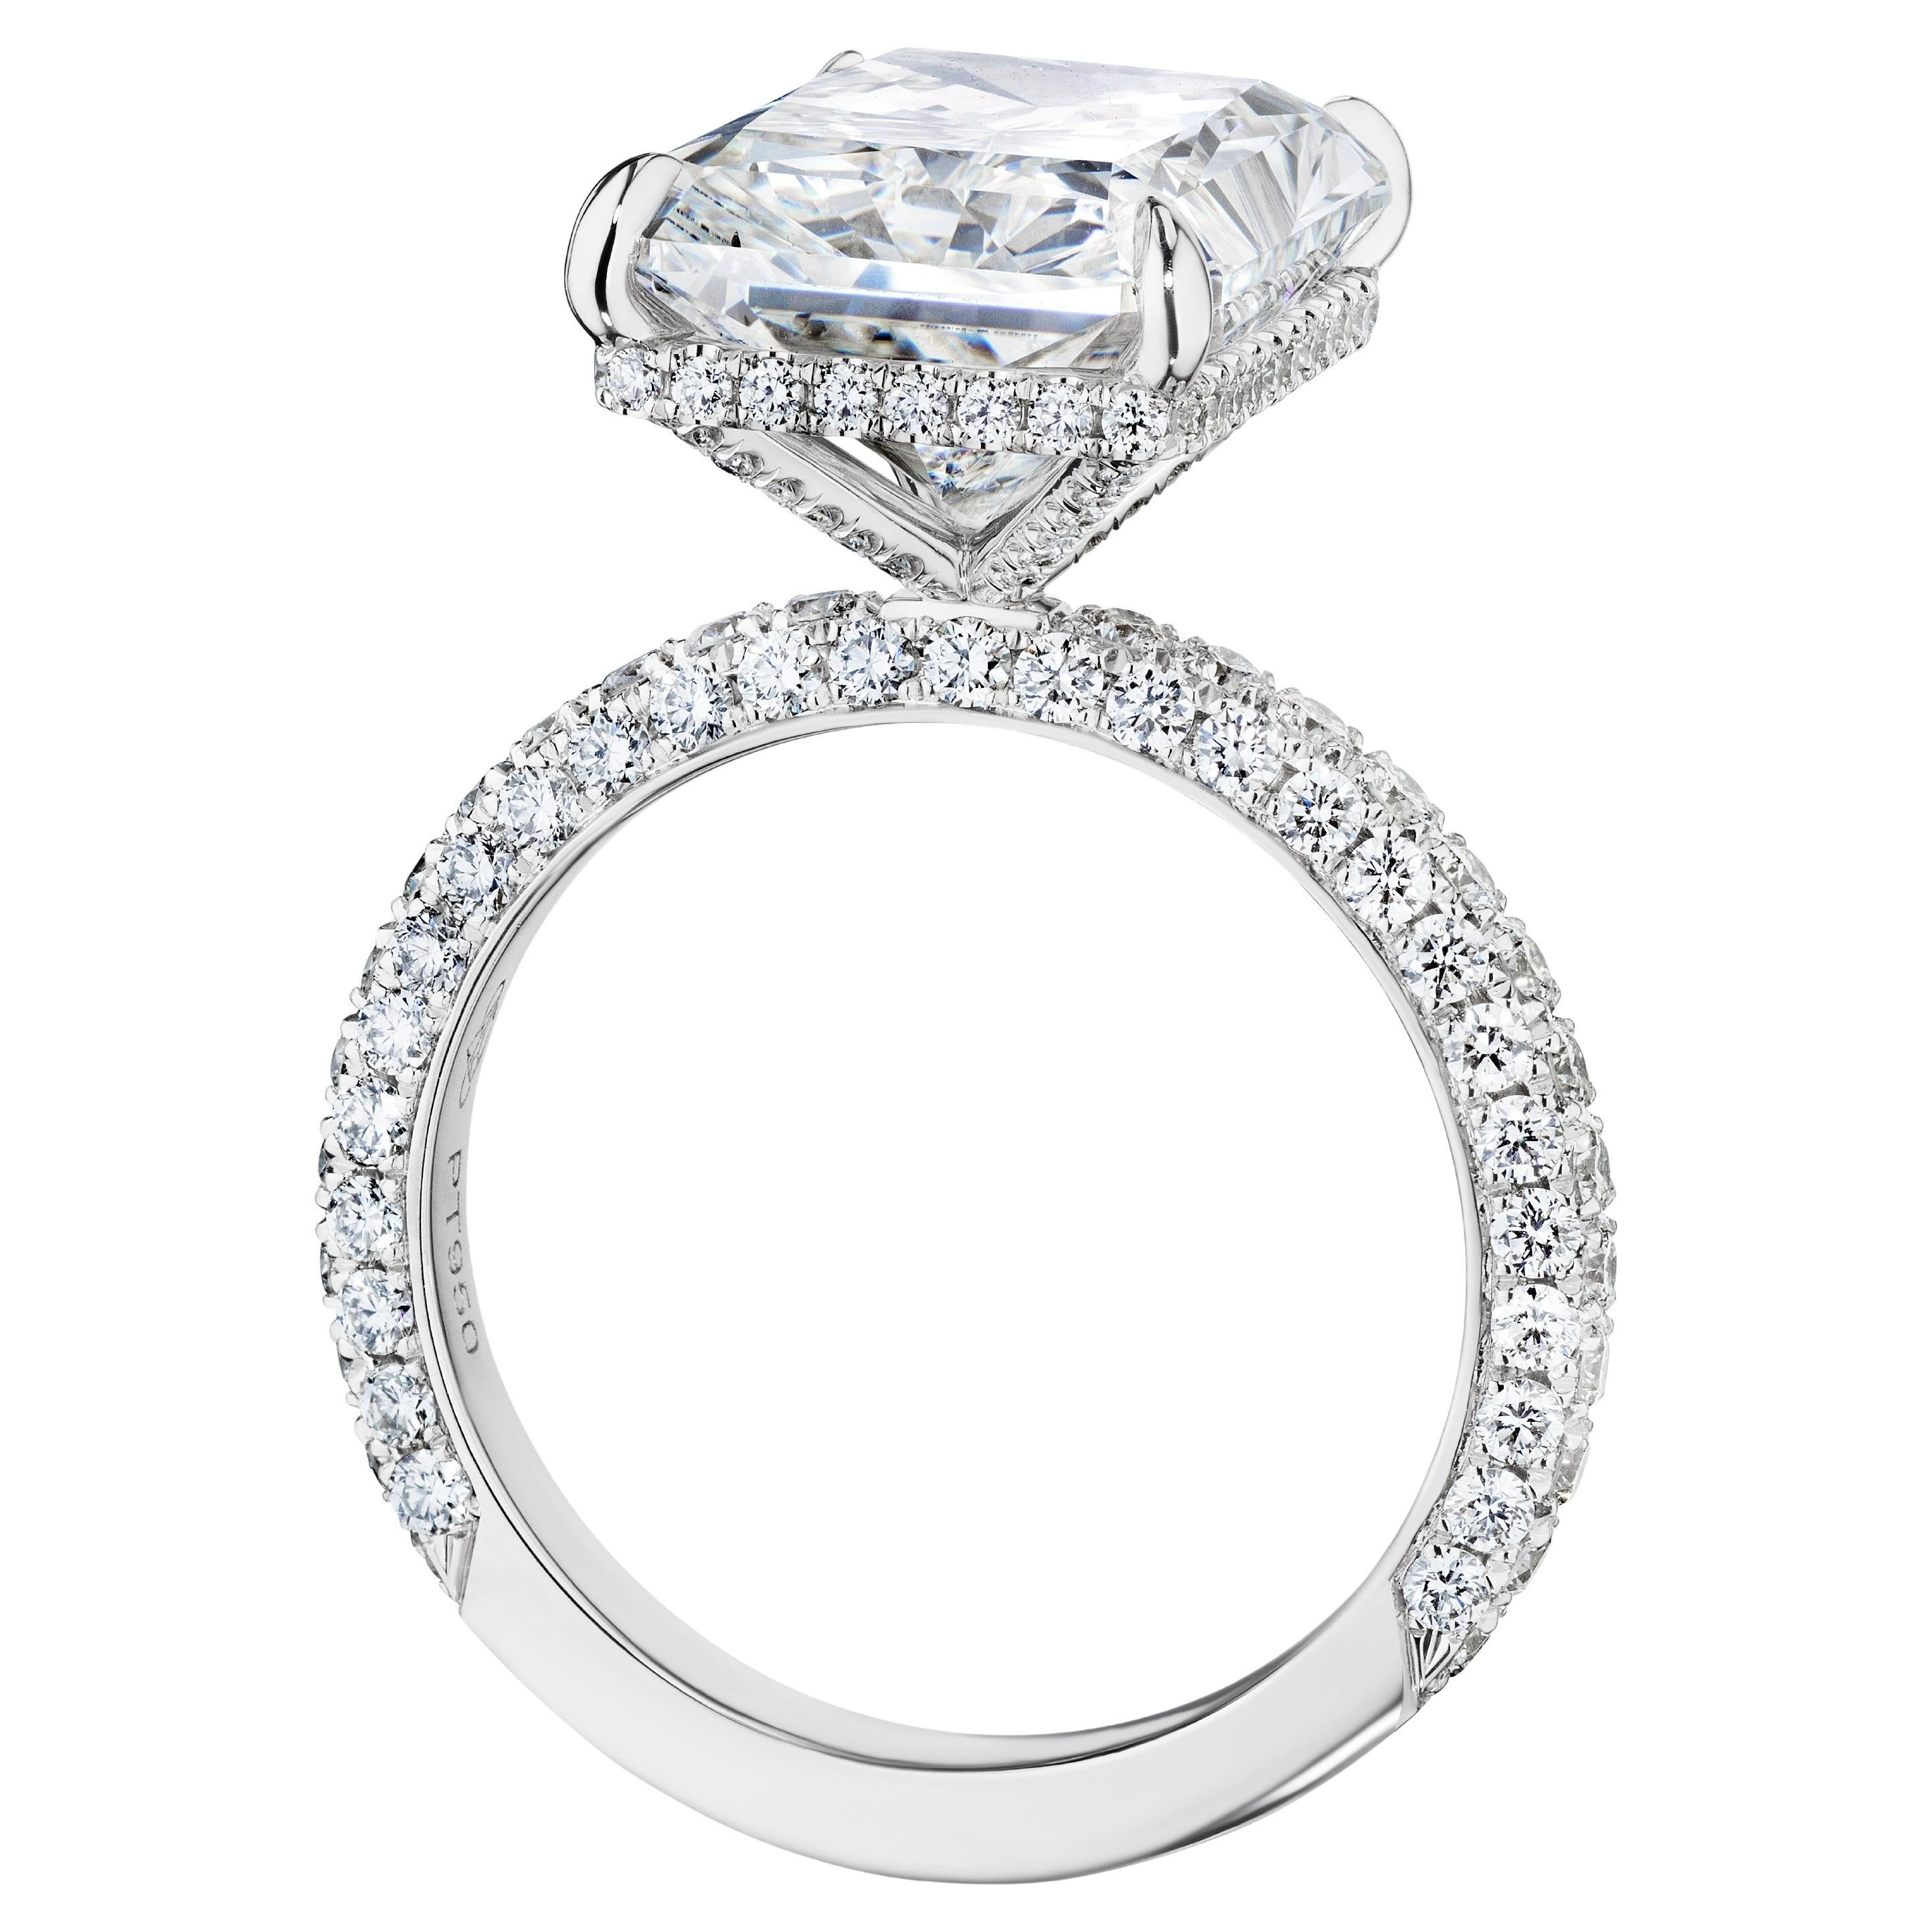 For Sale:  GIA Certified 6.00 Carat D SI1 GIA Radiant Diamond Engagement Ring "Catherine"